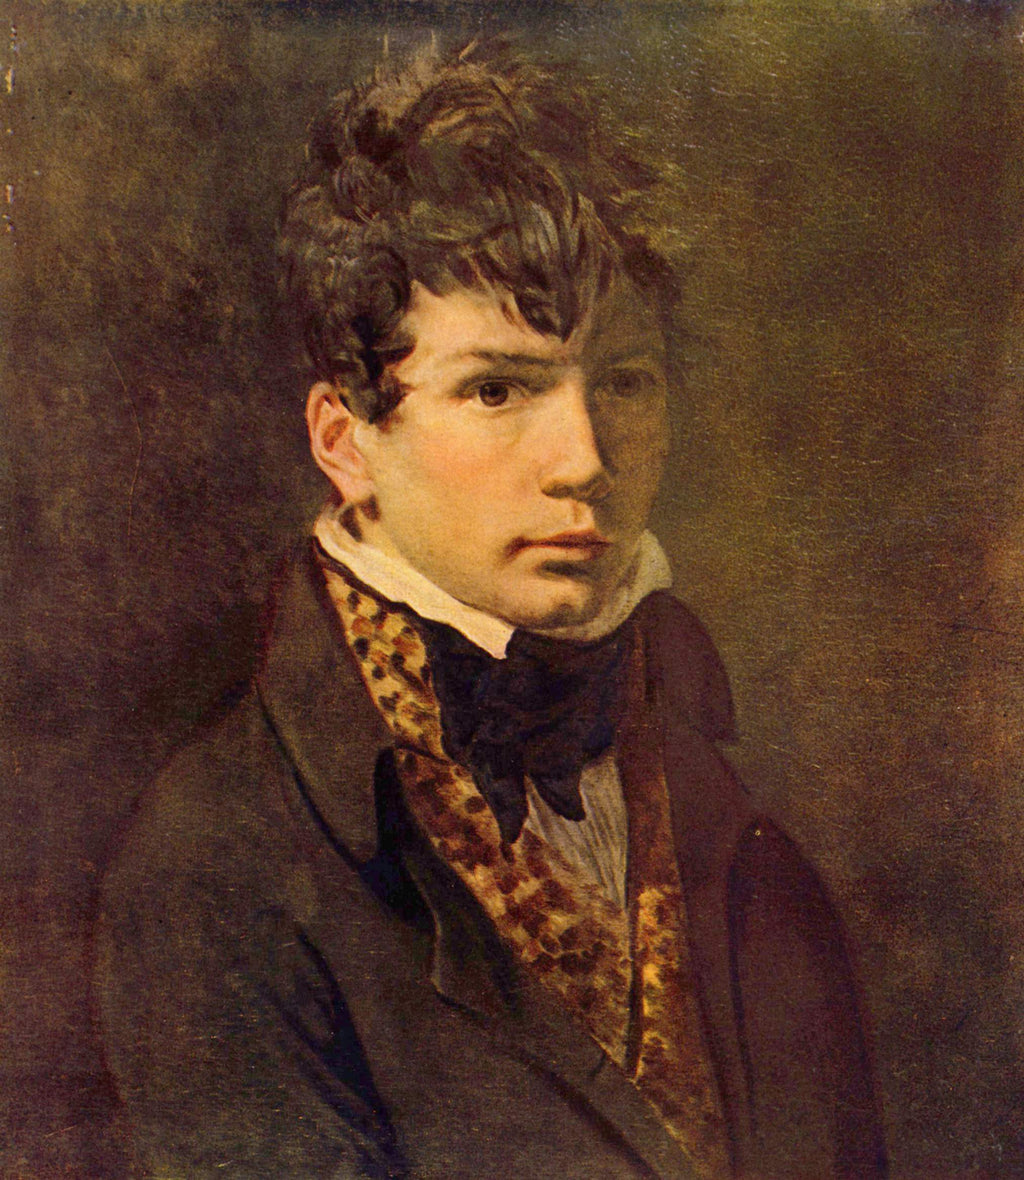 Portrait of the Young Ingres